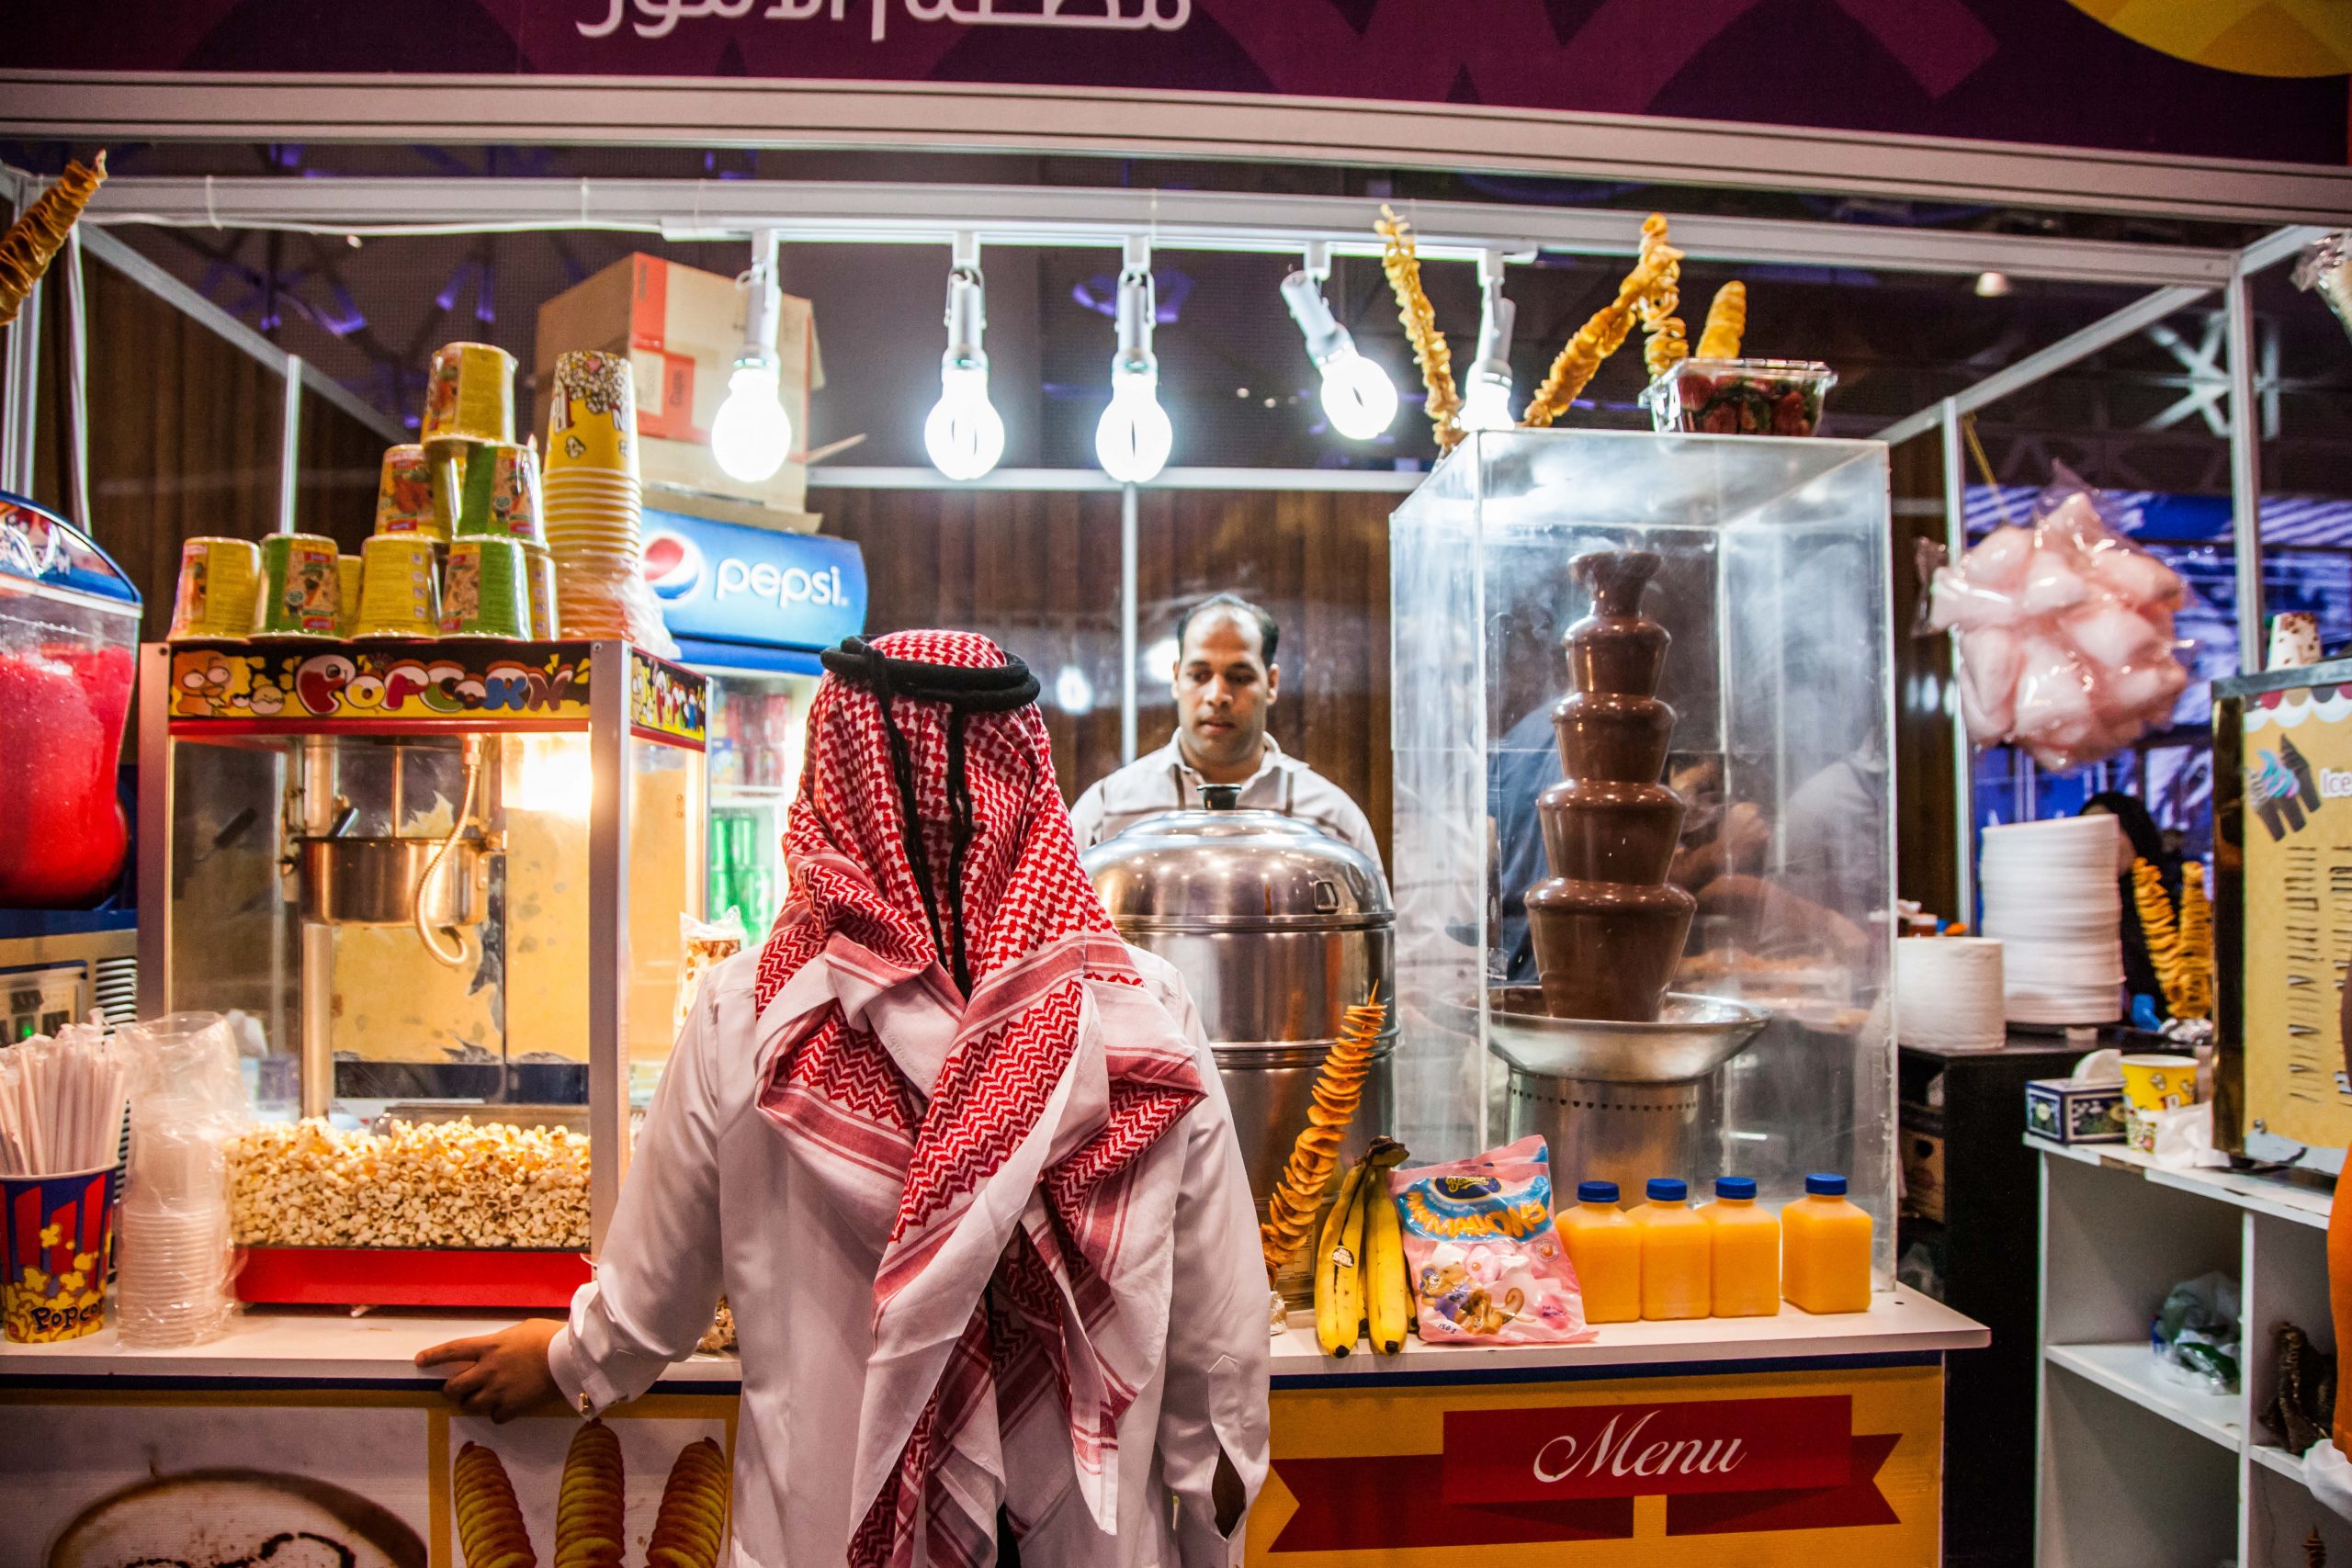 Winter in Qatar: Here’s a list of events to keep you entertained this season